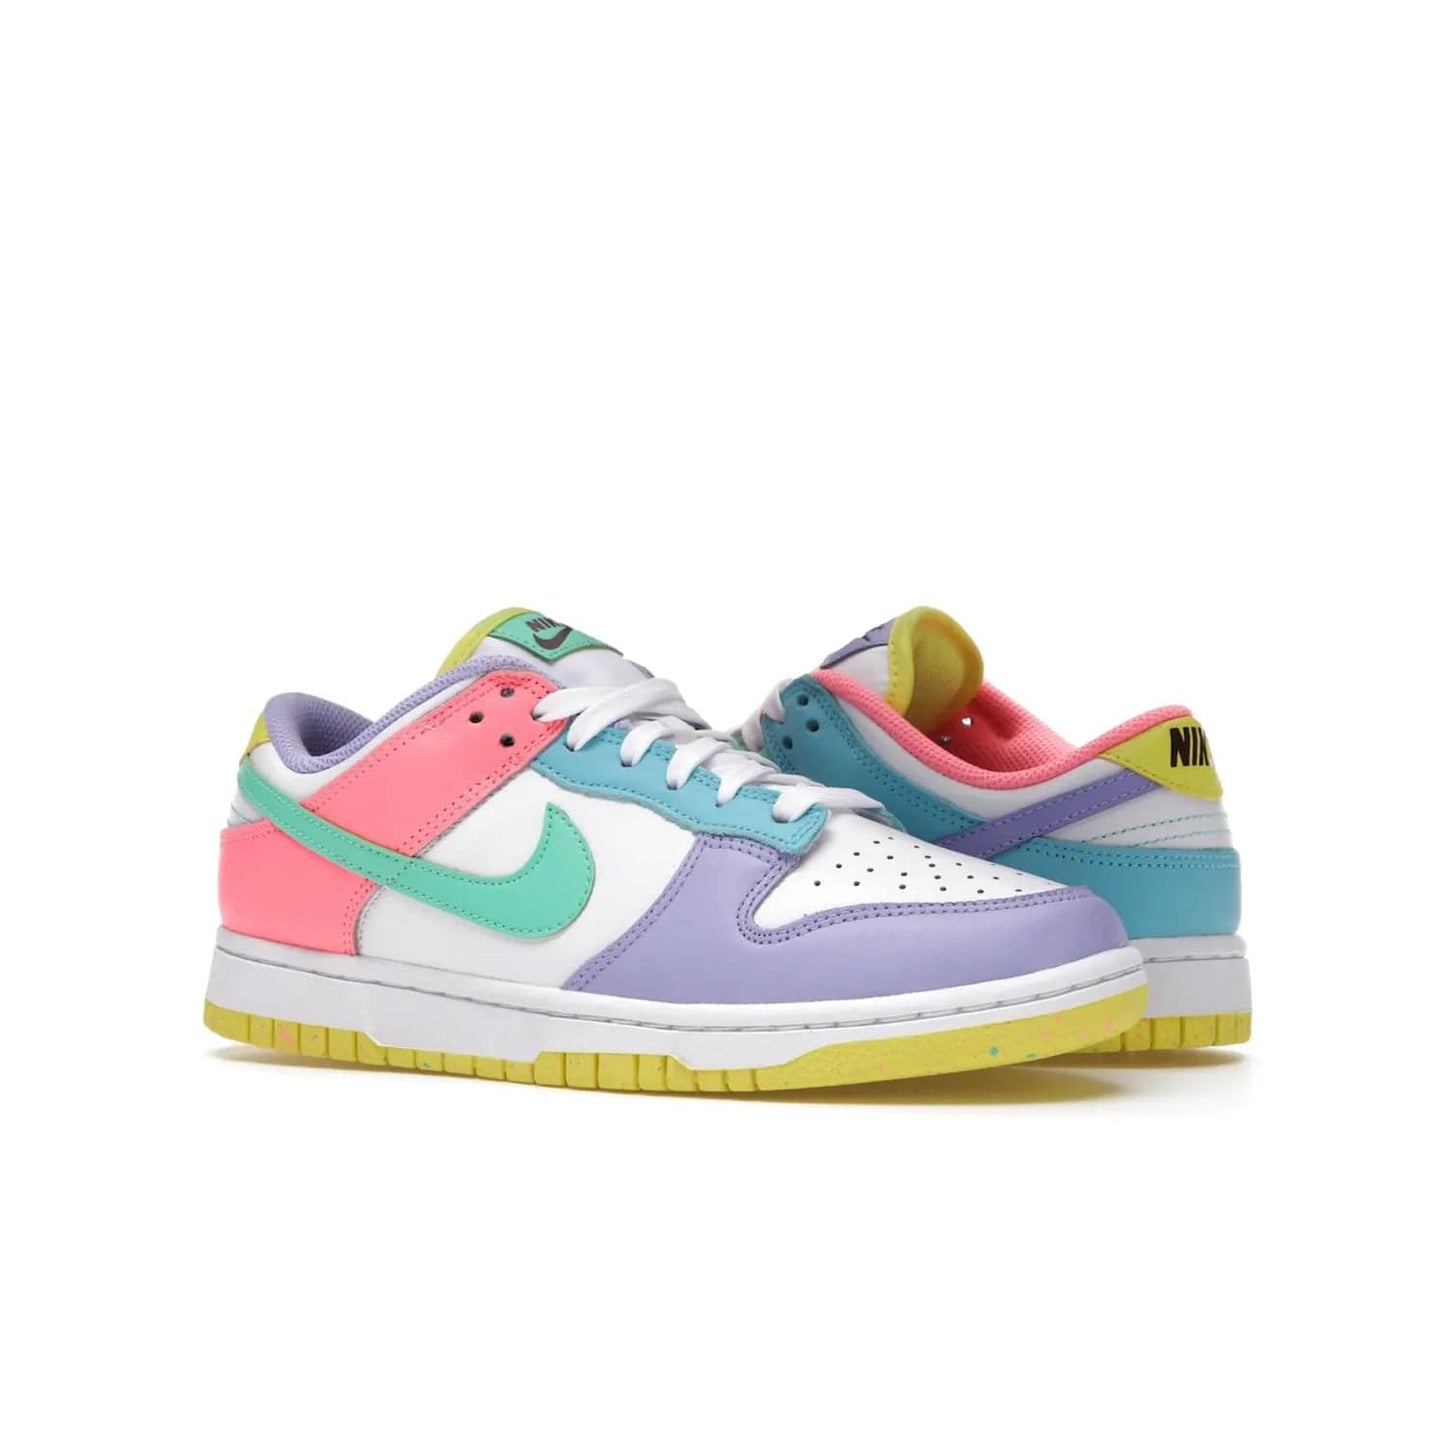 Nike Dunk Low SE Easter Candy (Women's) - Image 4 - Only at www.BallersClubKickz.com - UP
The Nike Dunk Low SE Easter Candy (Women's) brings a stylish touch to any outfit with its white leather upper, colorful accents, and multicolor speckle detailing. Shop now before they're gone.